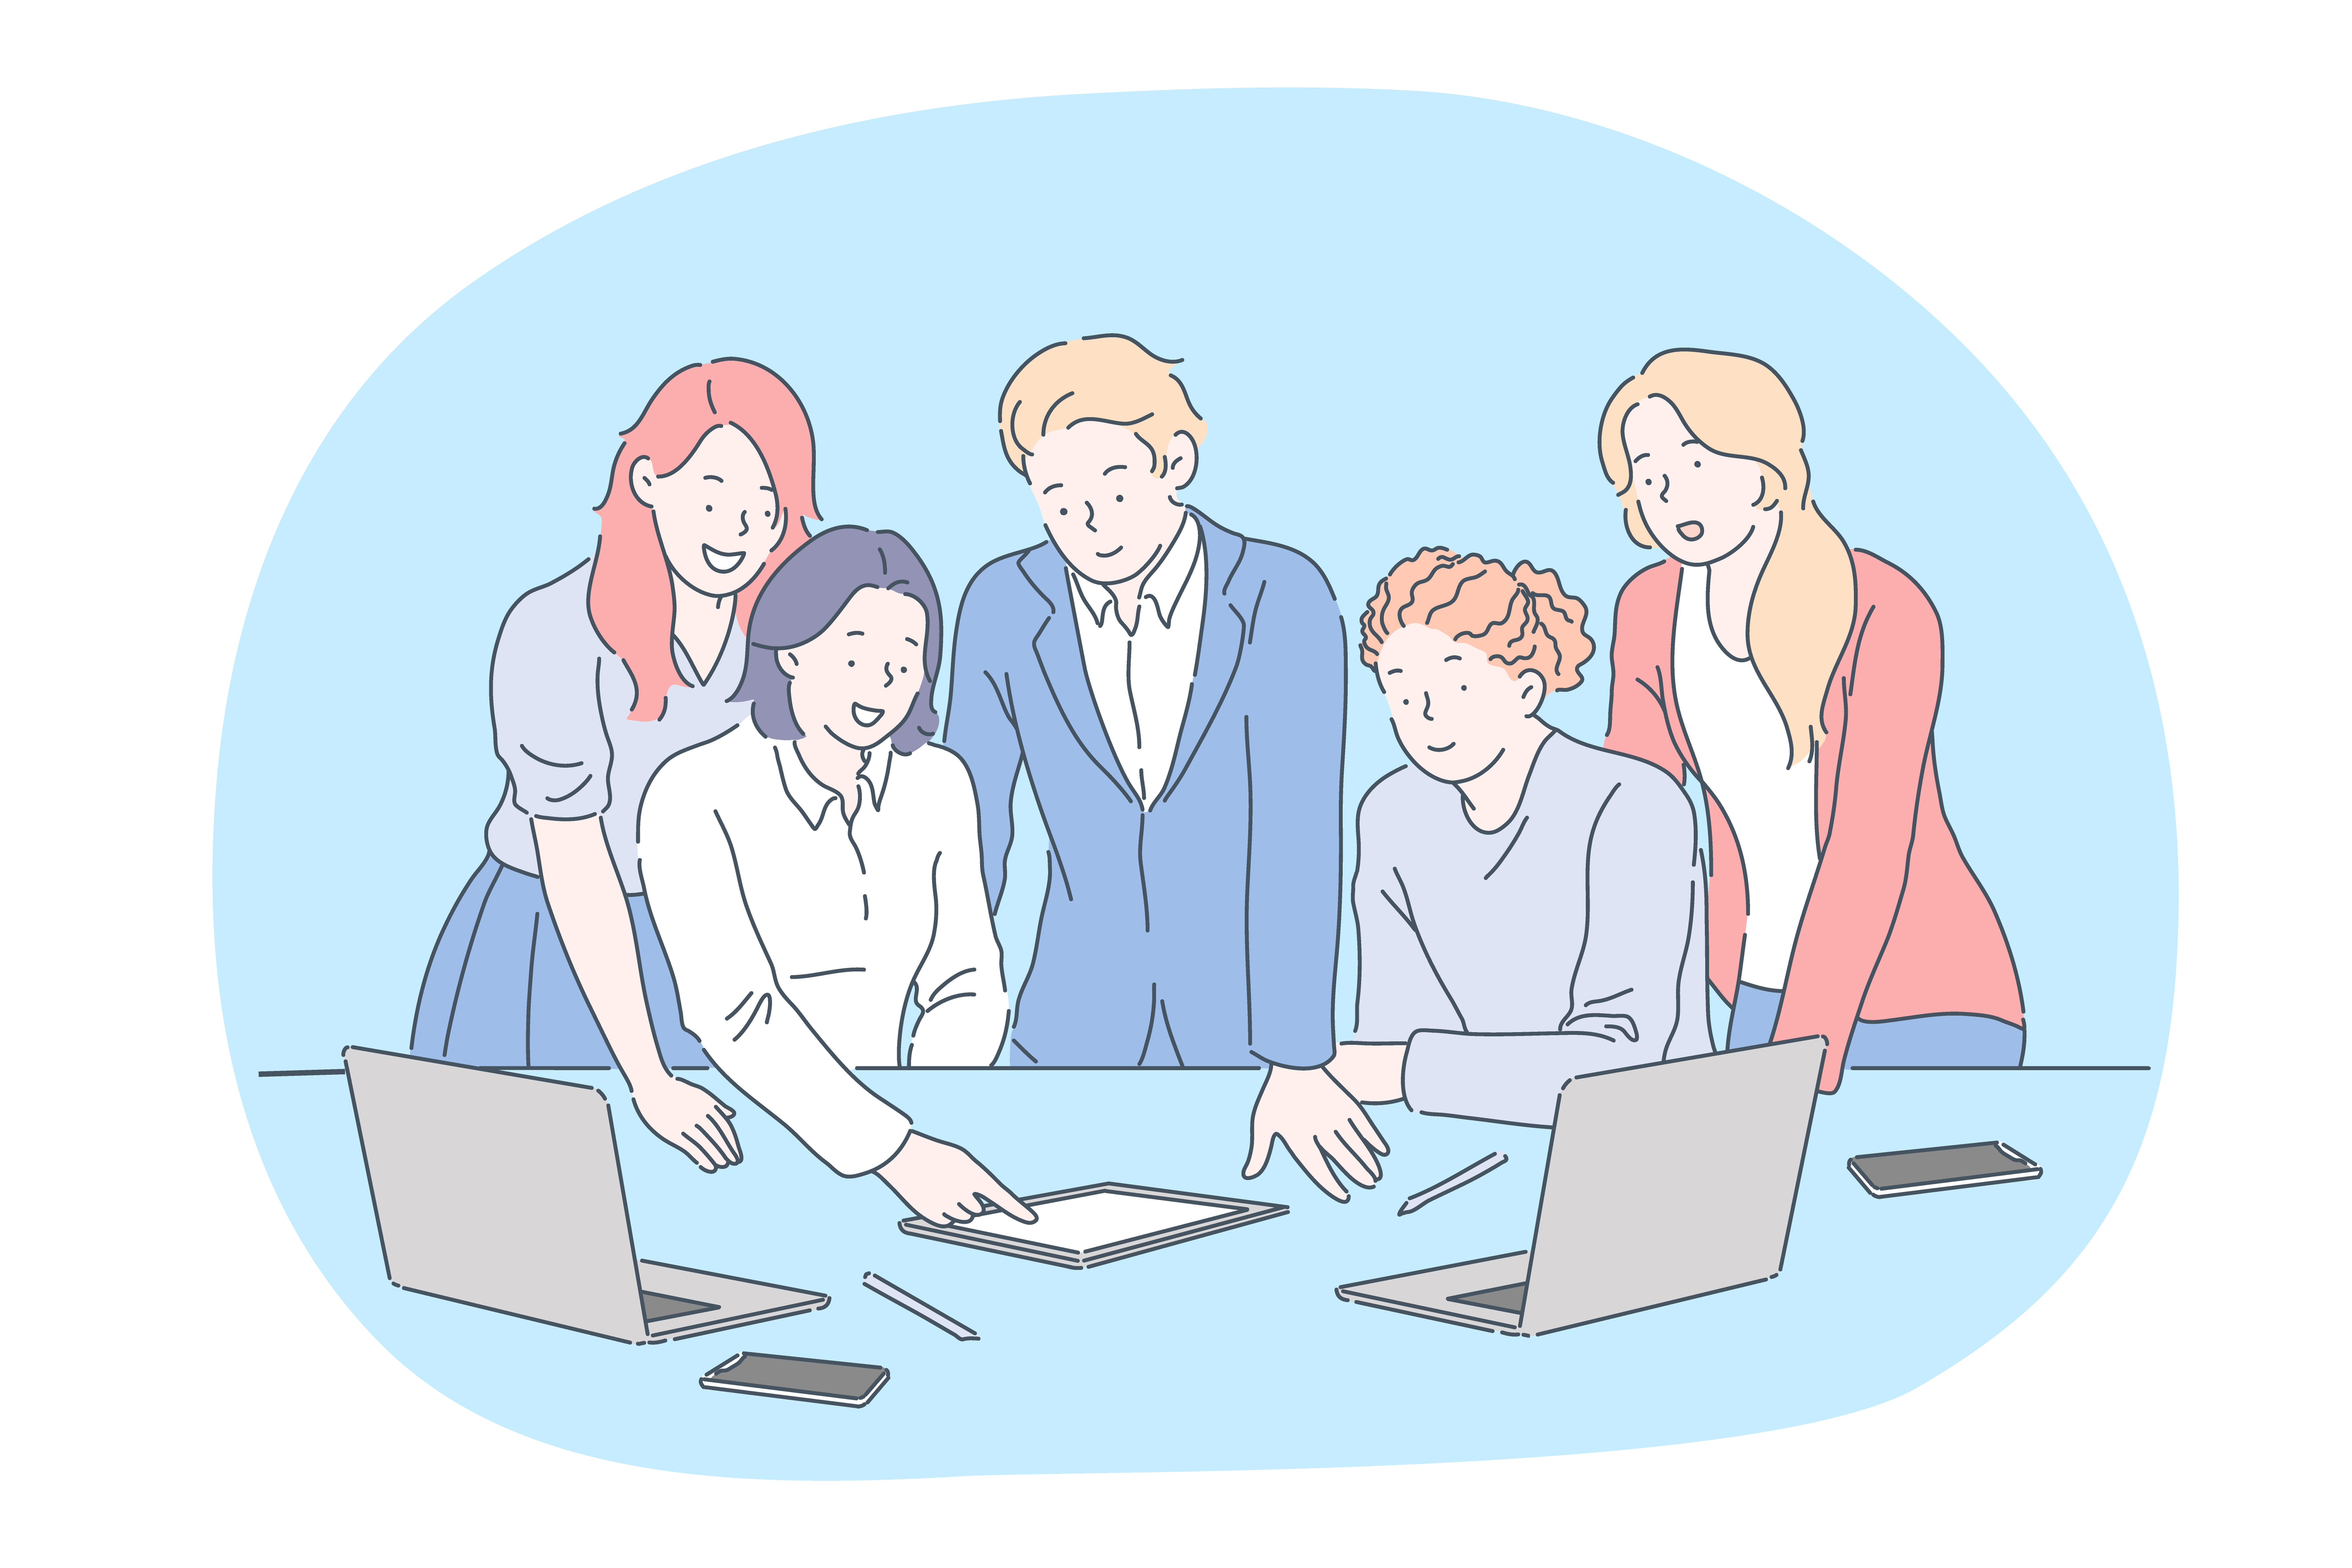 Coworking, brainstorm, business, partnership, team, discussion concept. Business people team partners coworkers cartoon characters discussing working strategy and startup in office together in team. Coworking, brainstorm, business, partnership, team, discussion concept